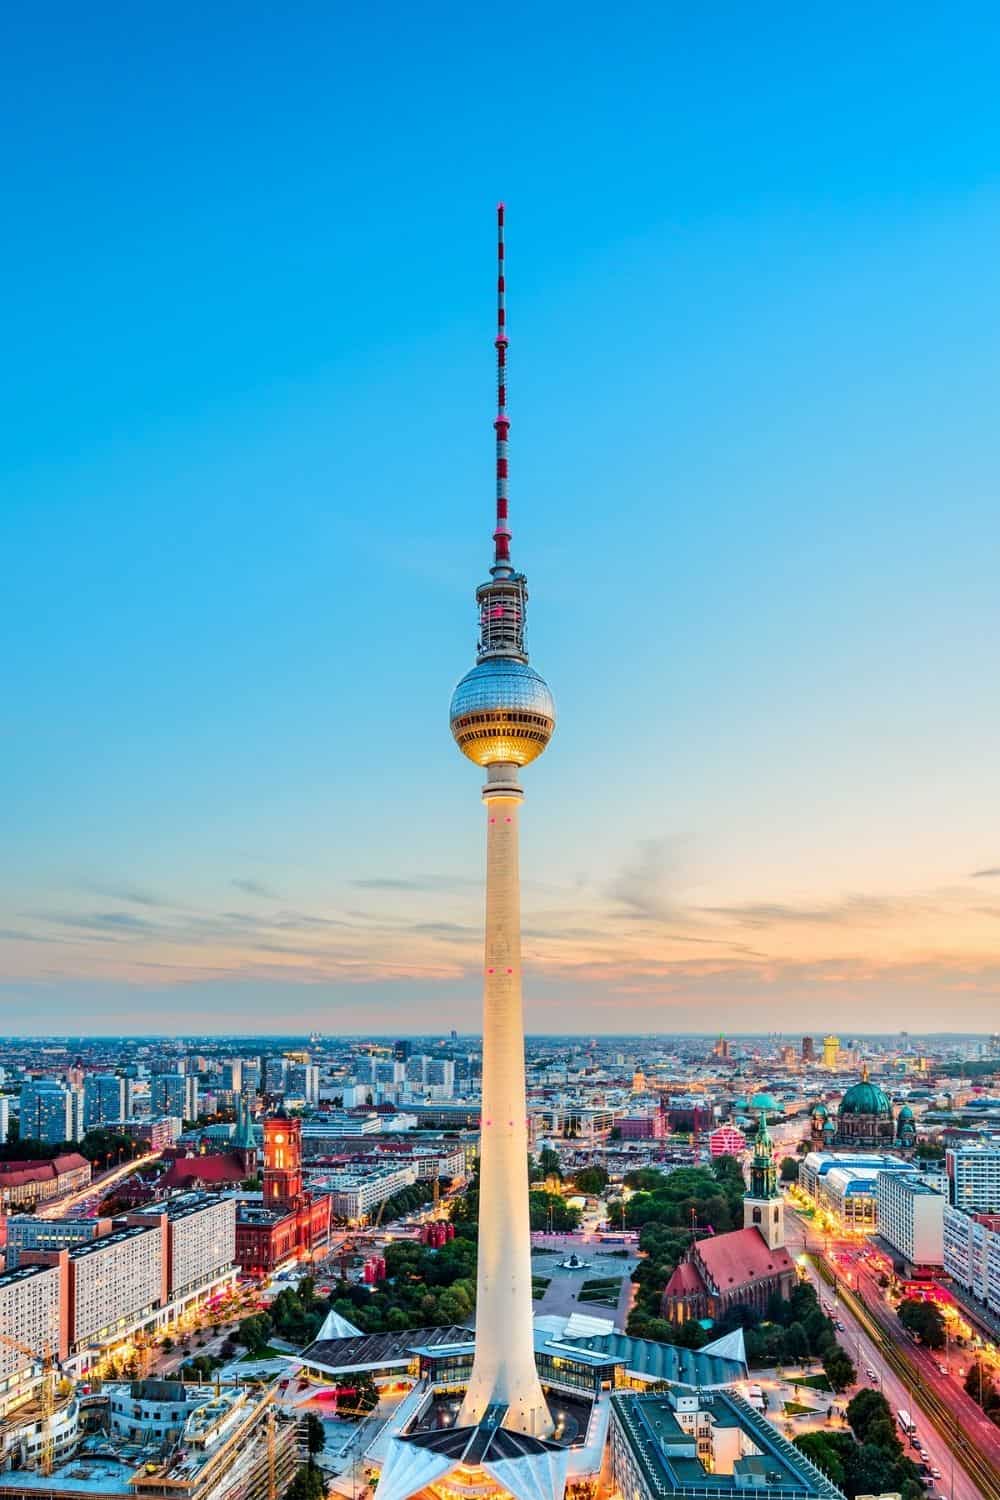 Deregister From Berlin & Cancel Contracts. View of the Berlin TV tower.